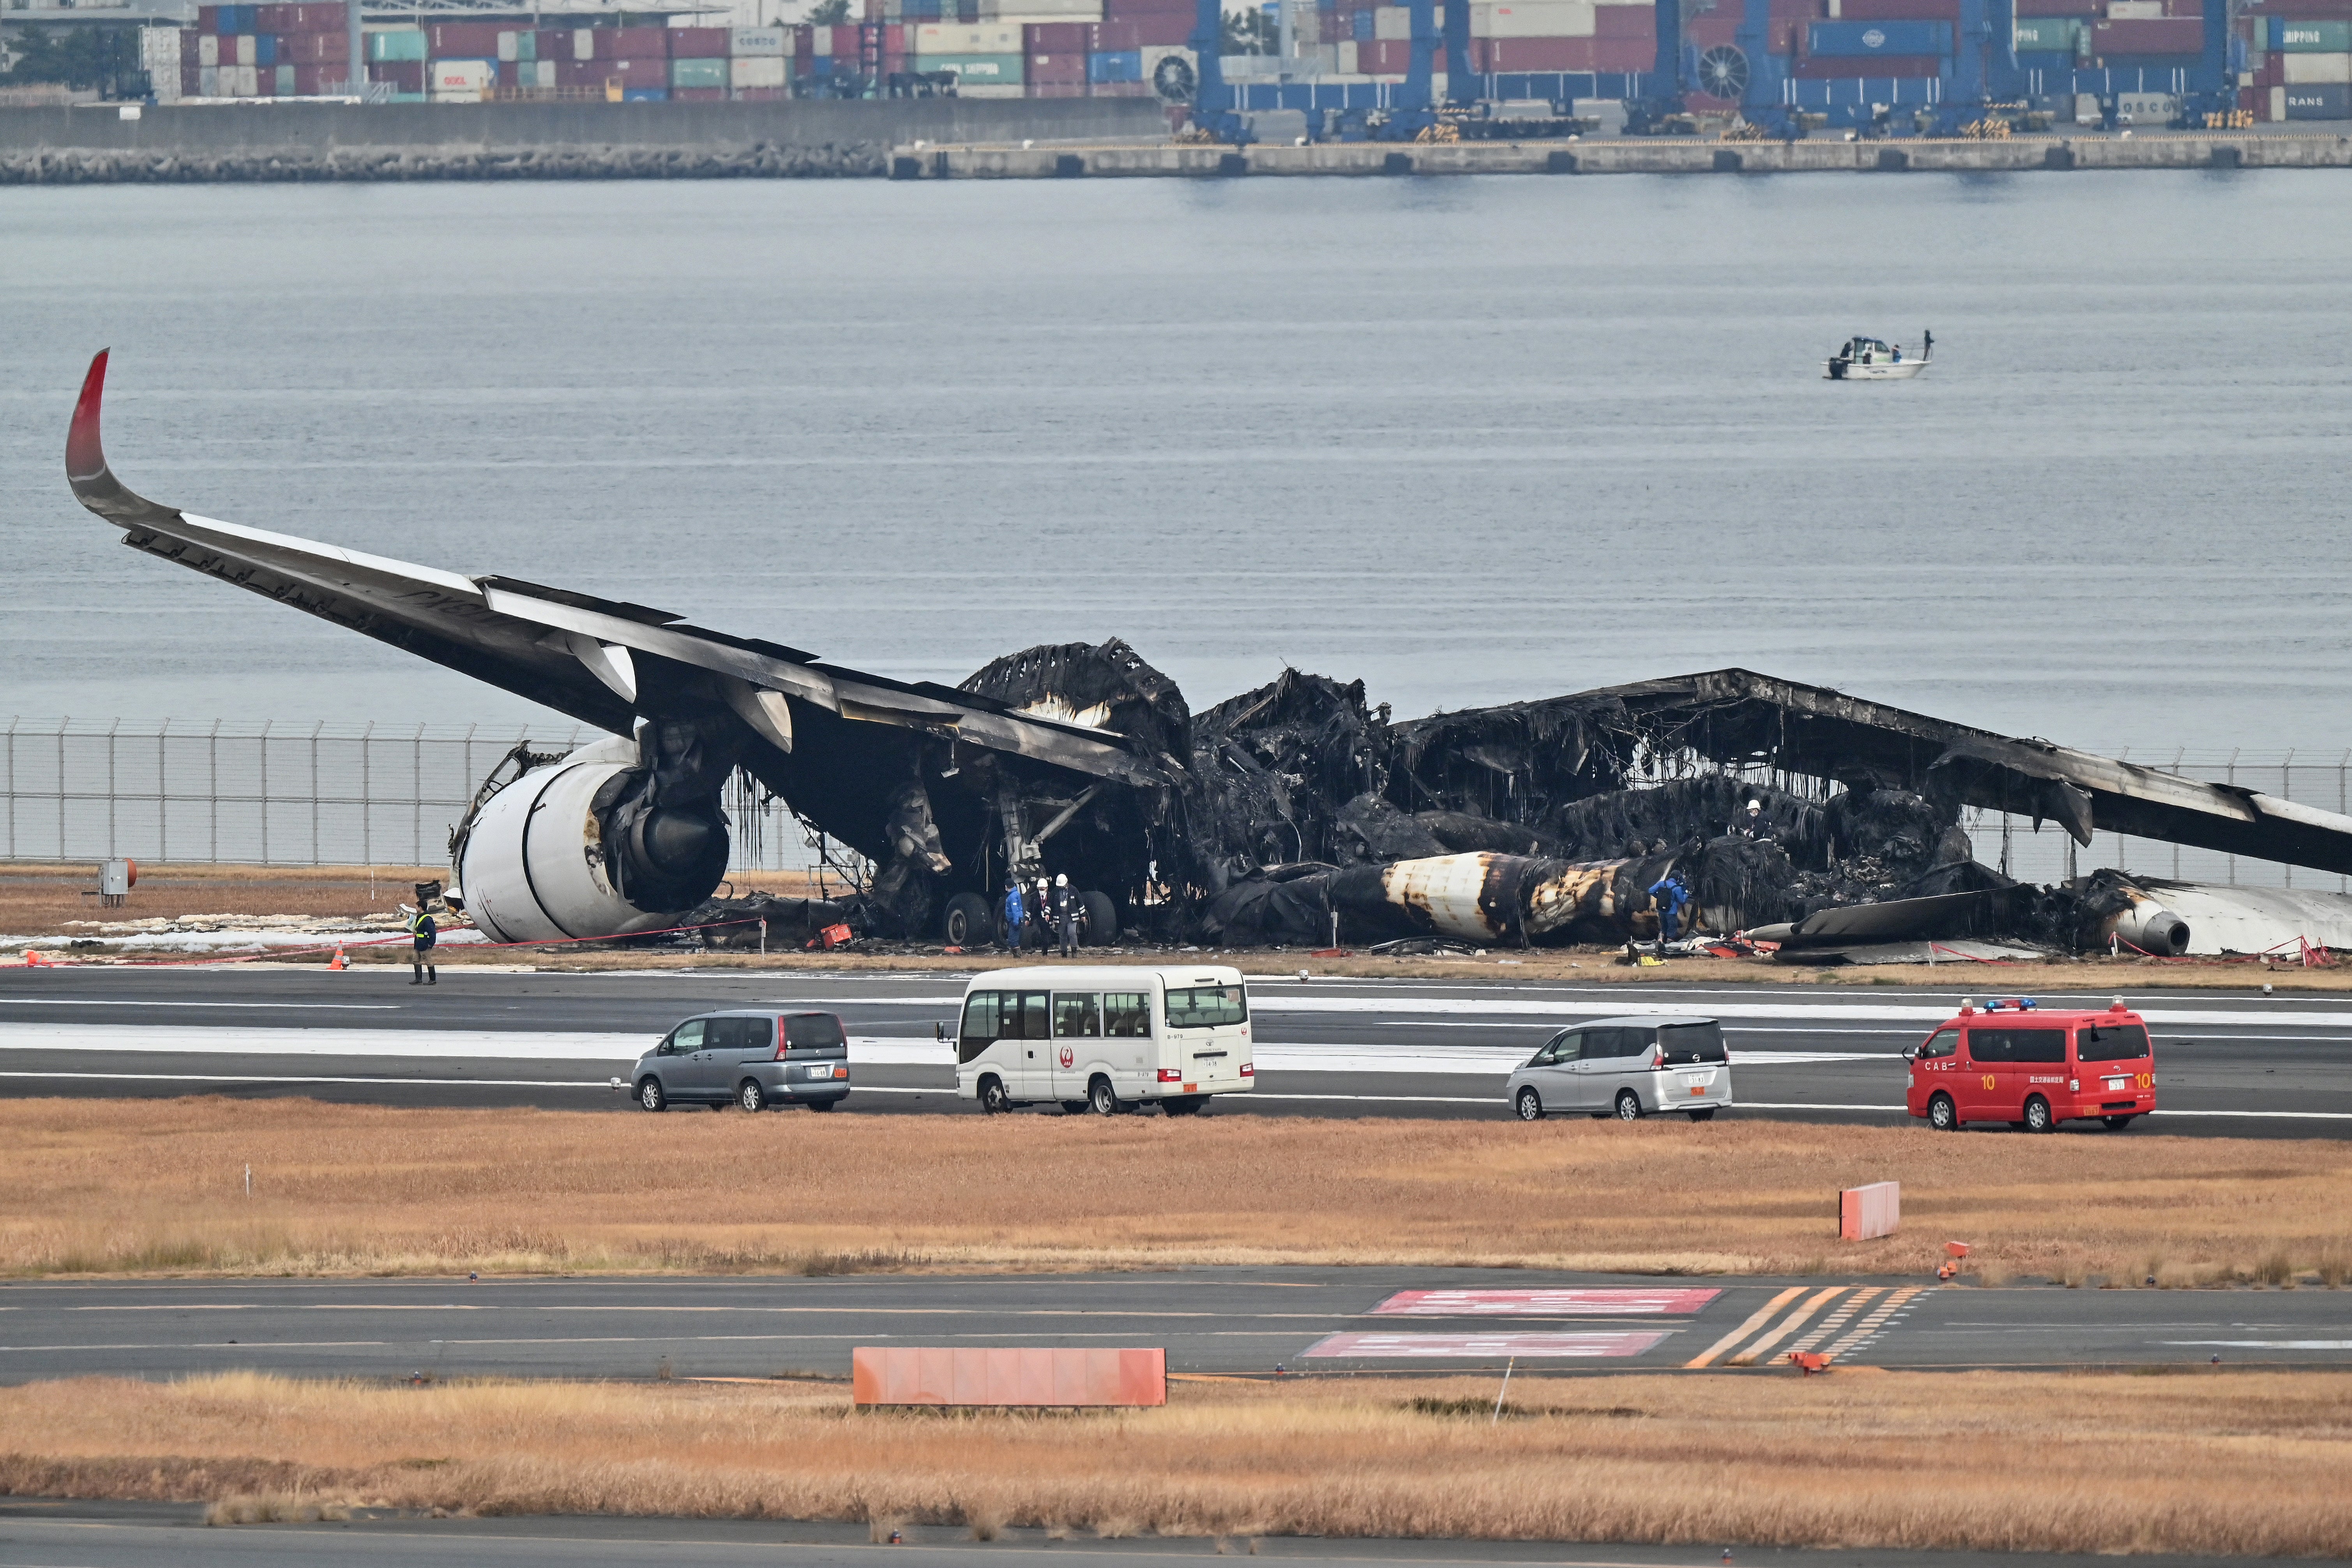 Officials look at the wreckage of the Japan Airlines plane on the tarmac